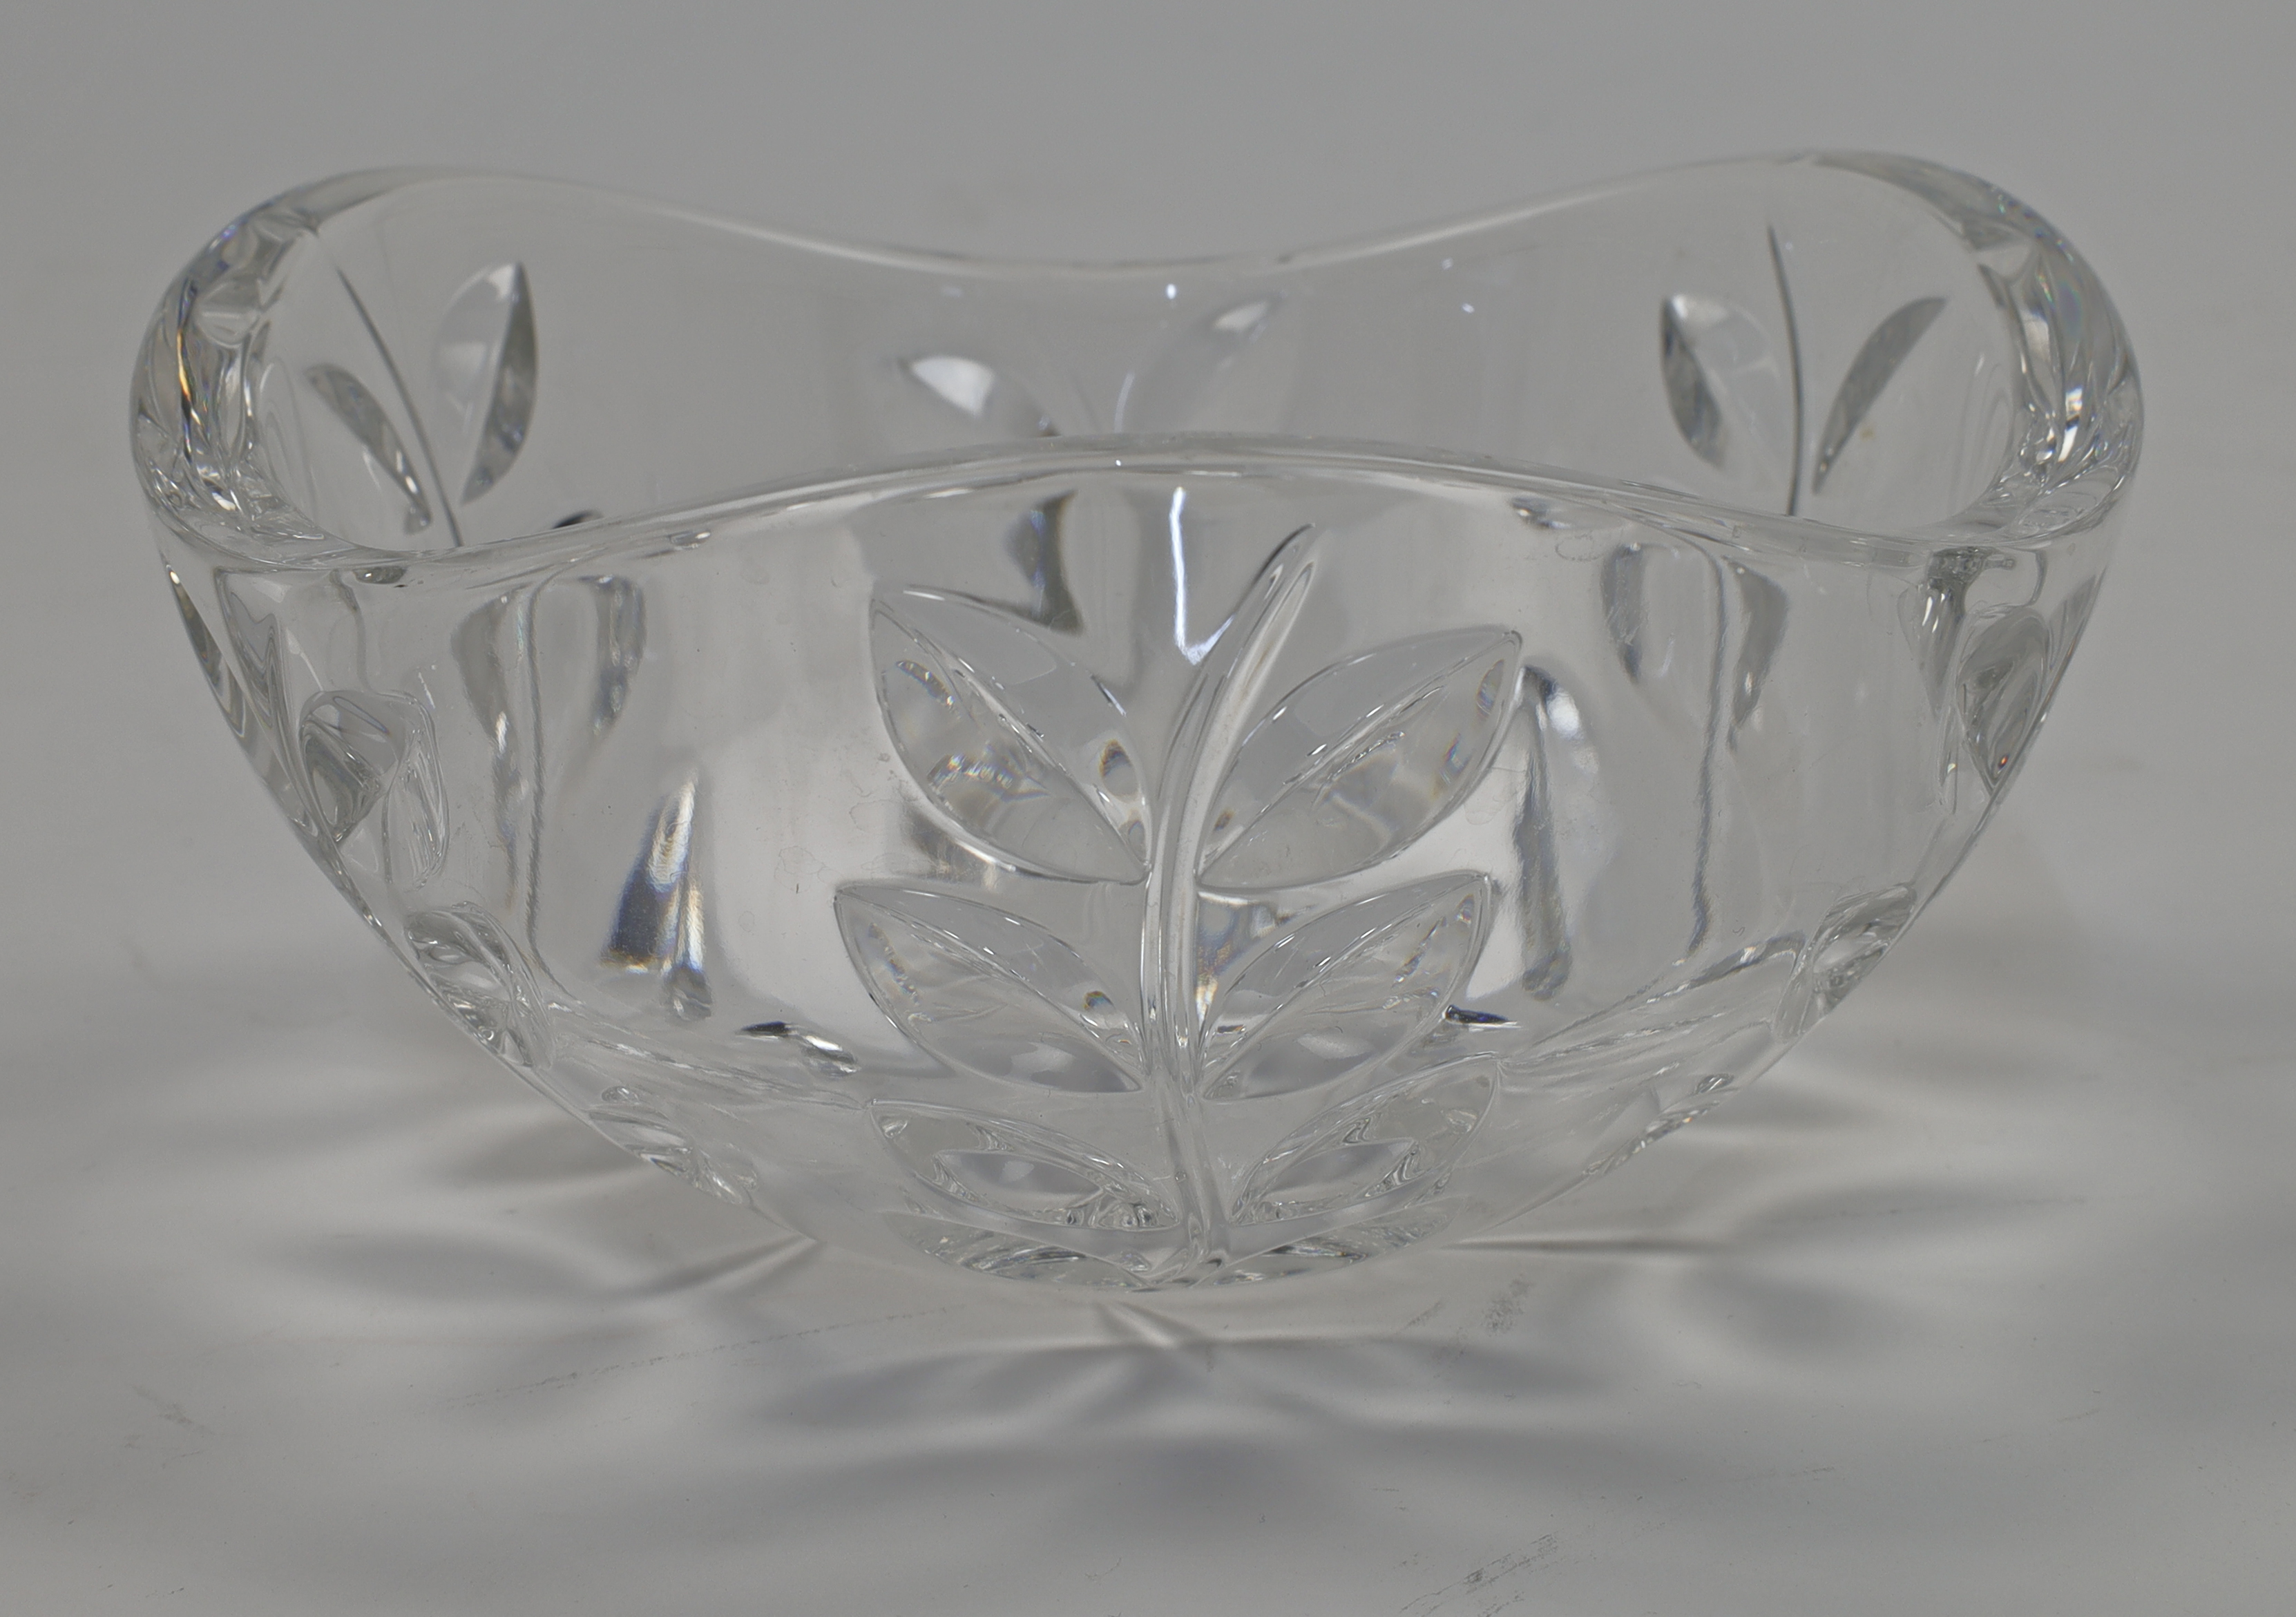 A 'Floral Vine' bowl by Tiffany & Co., 20th century, with undulating rim and moulded leaf vines i...